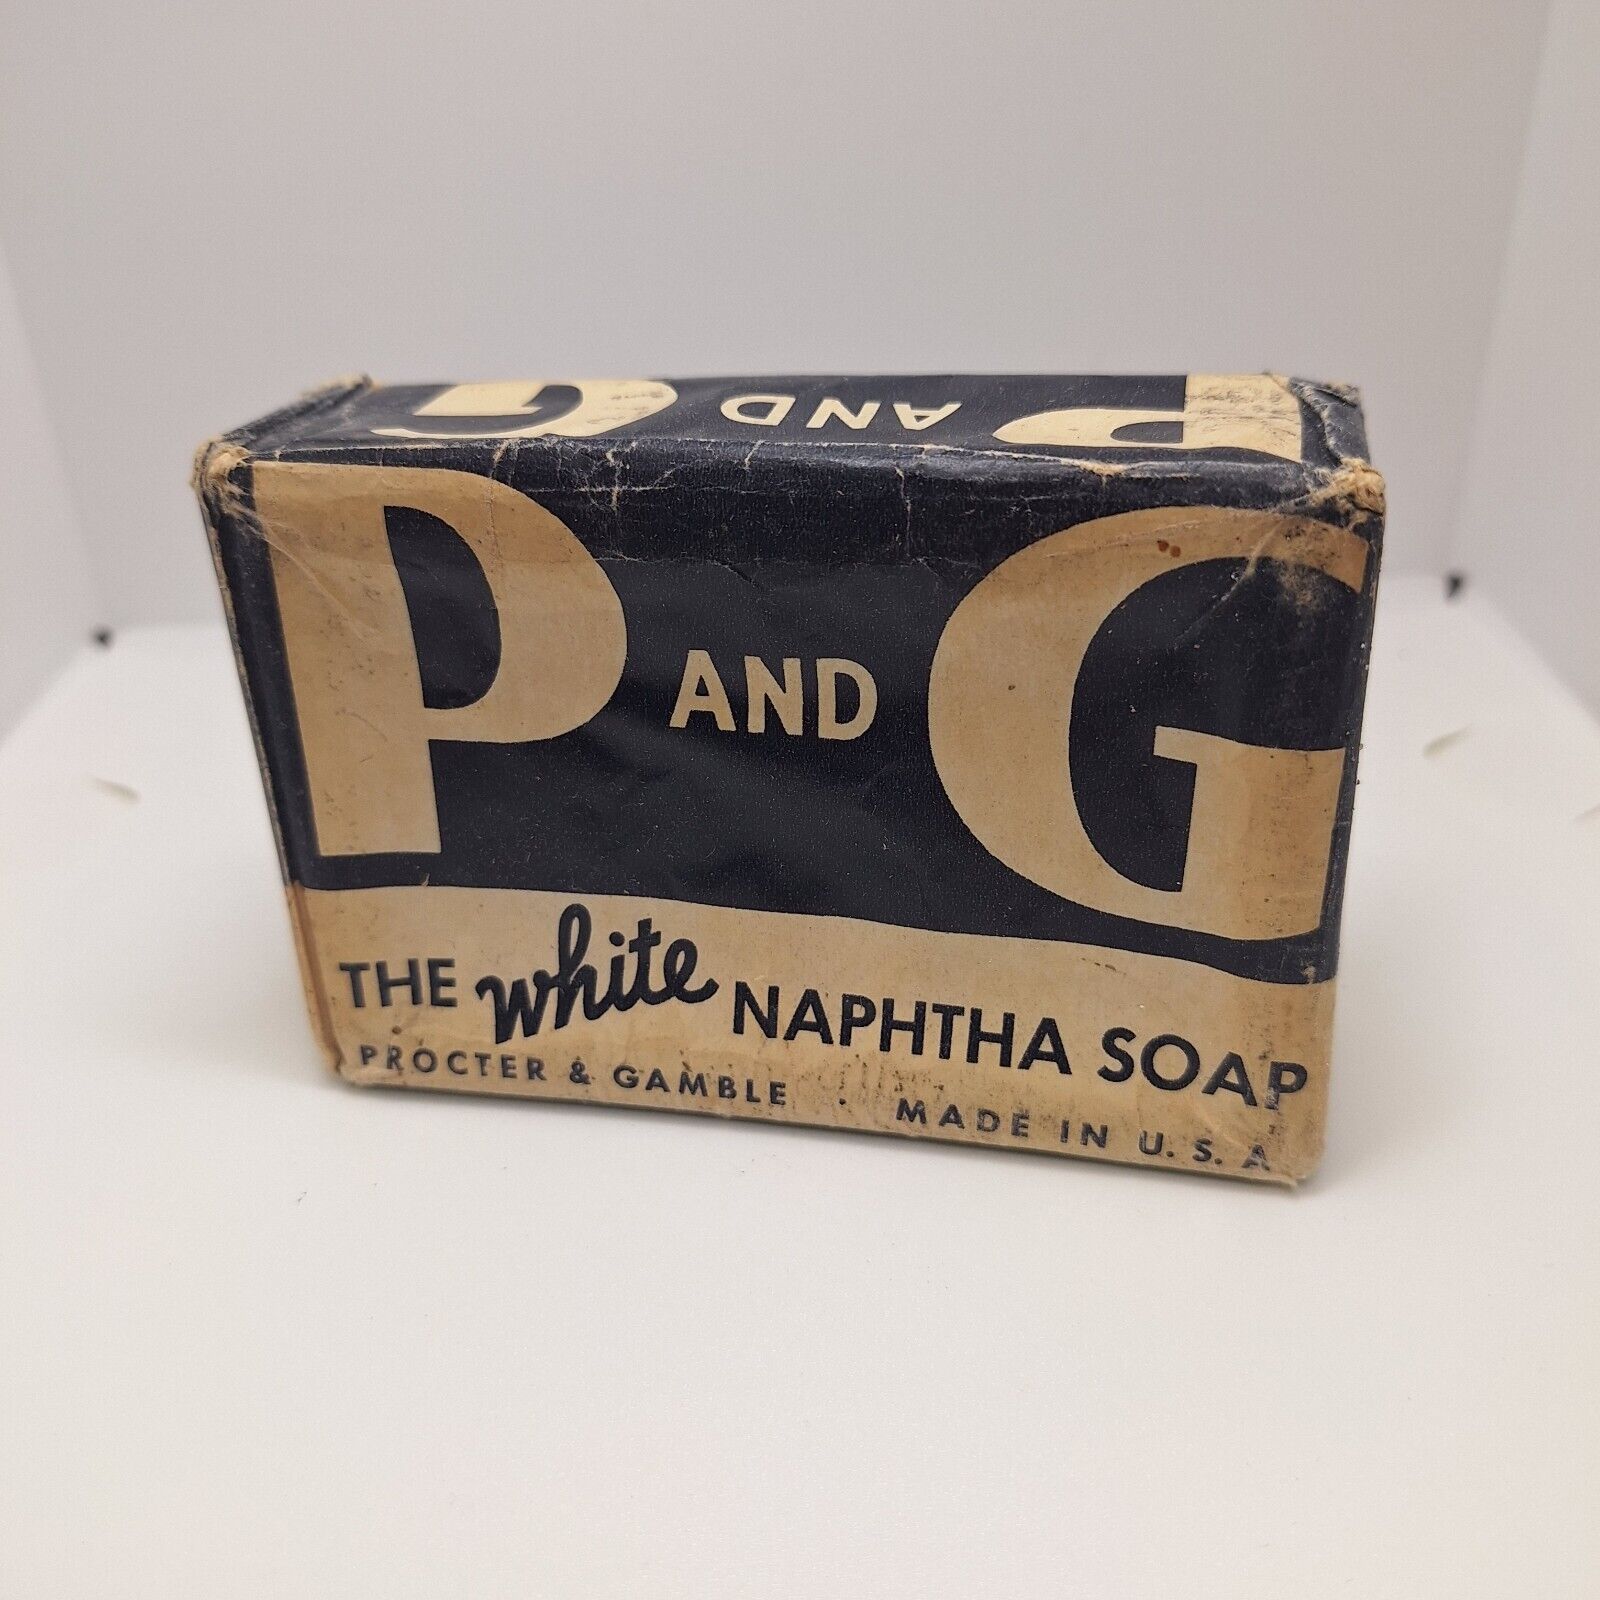 Vintage P and G The White Naptha Soap Bar Procter and Gamble